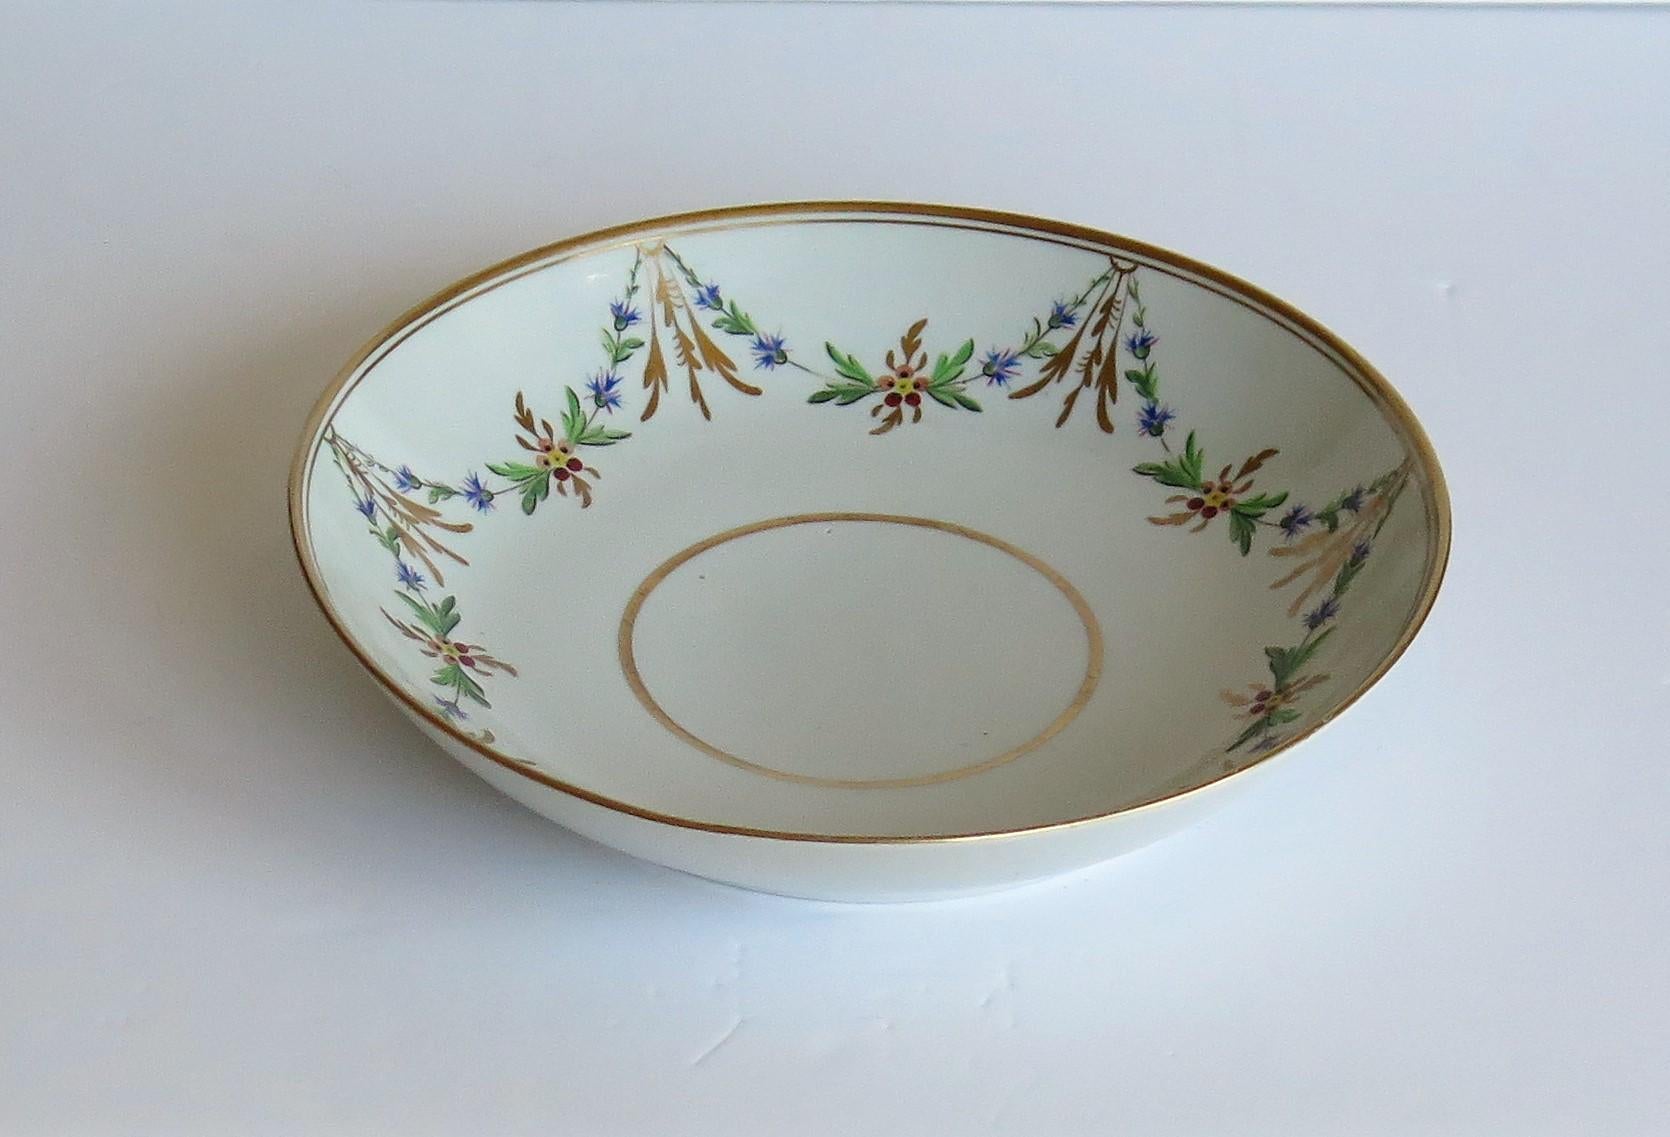 This is a porcelain, hand painted and gilded deep plate or saucer dish made by Miles Mason (Mason's), Staffordshire Potteries, England in the very early years of the 19th century, George III period, circa 1805.

The dish is well potted on a low